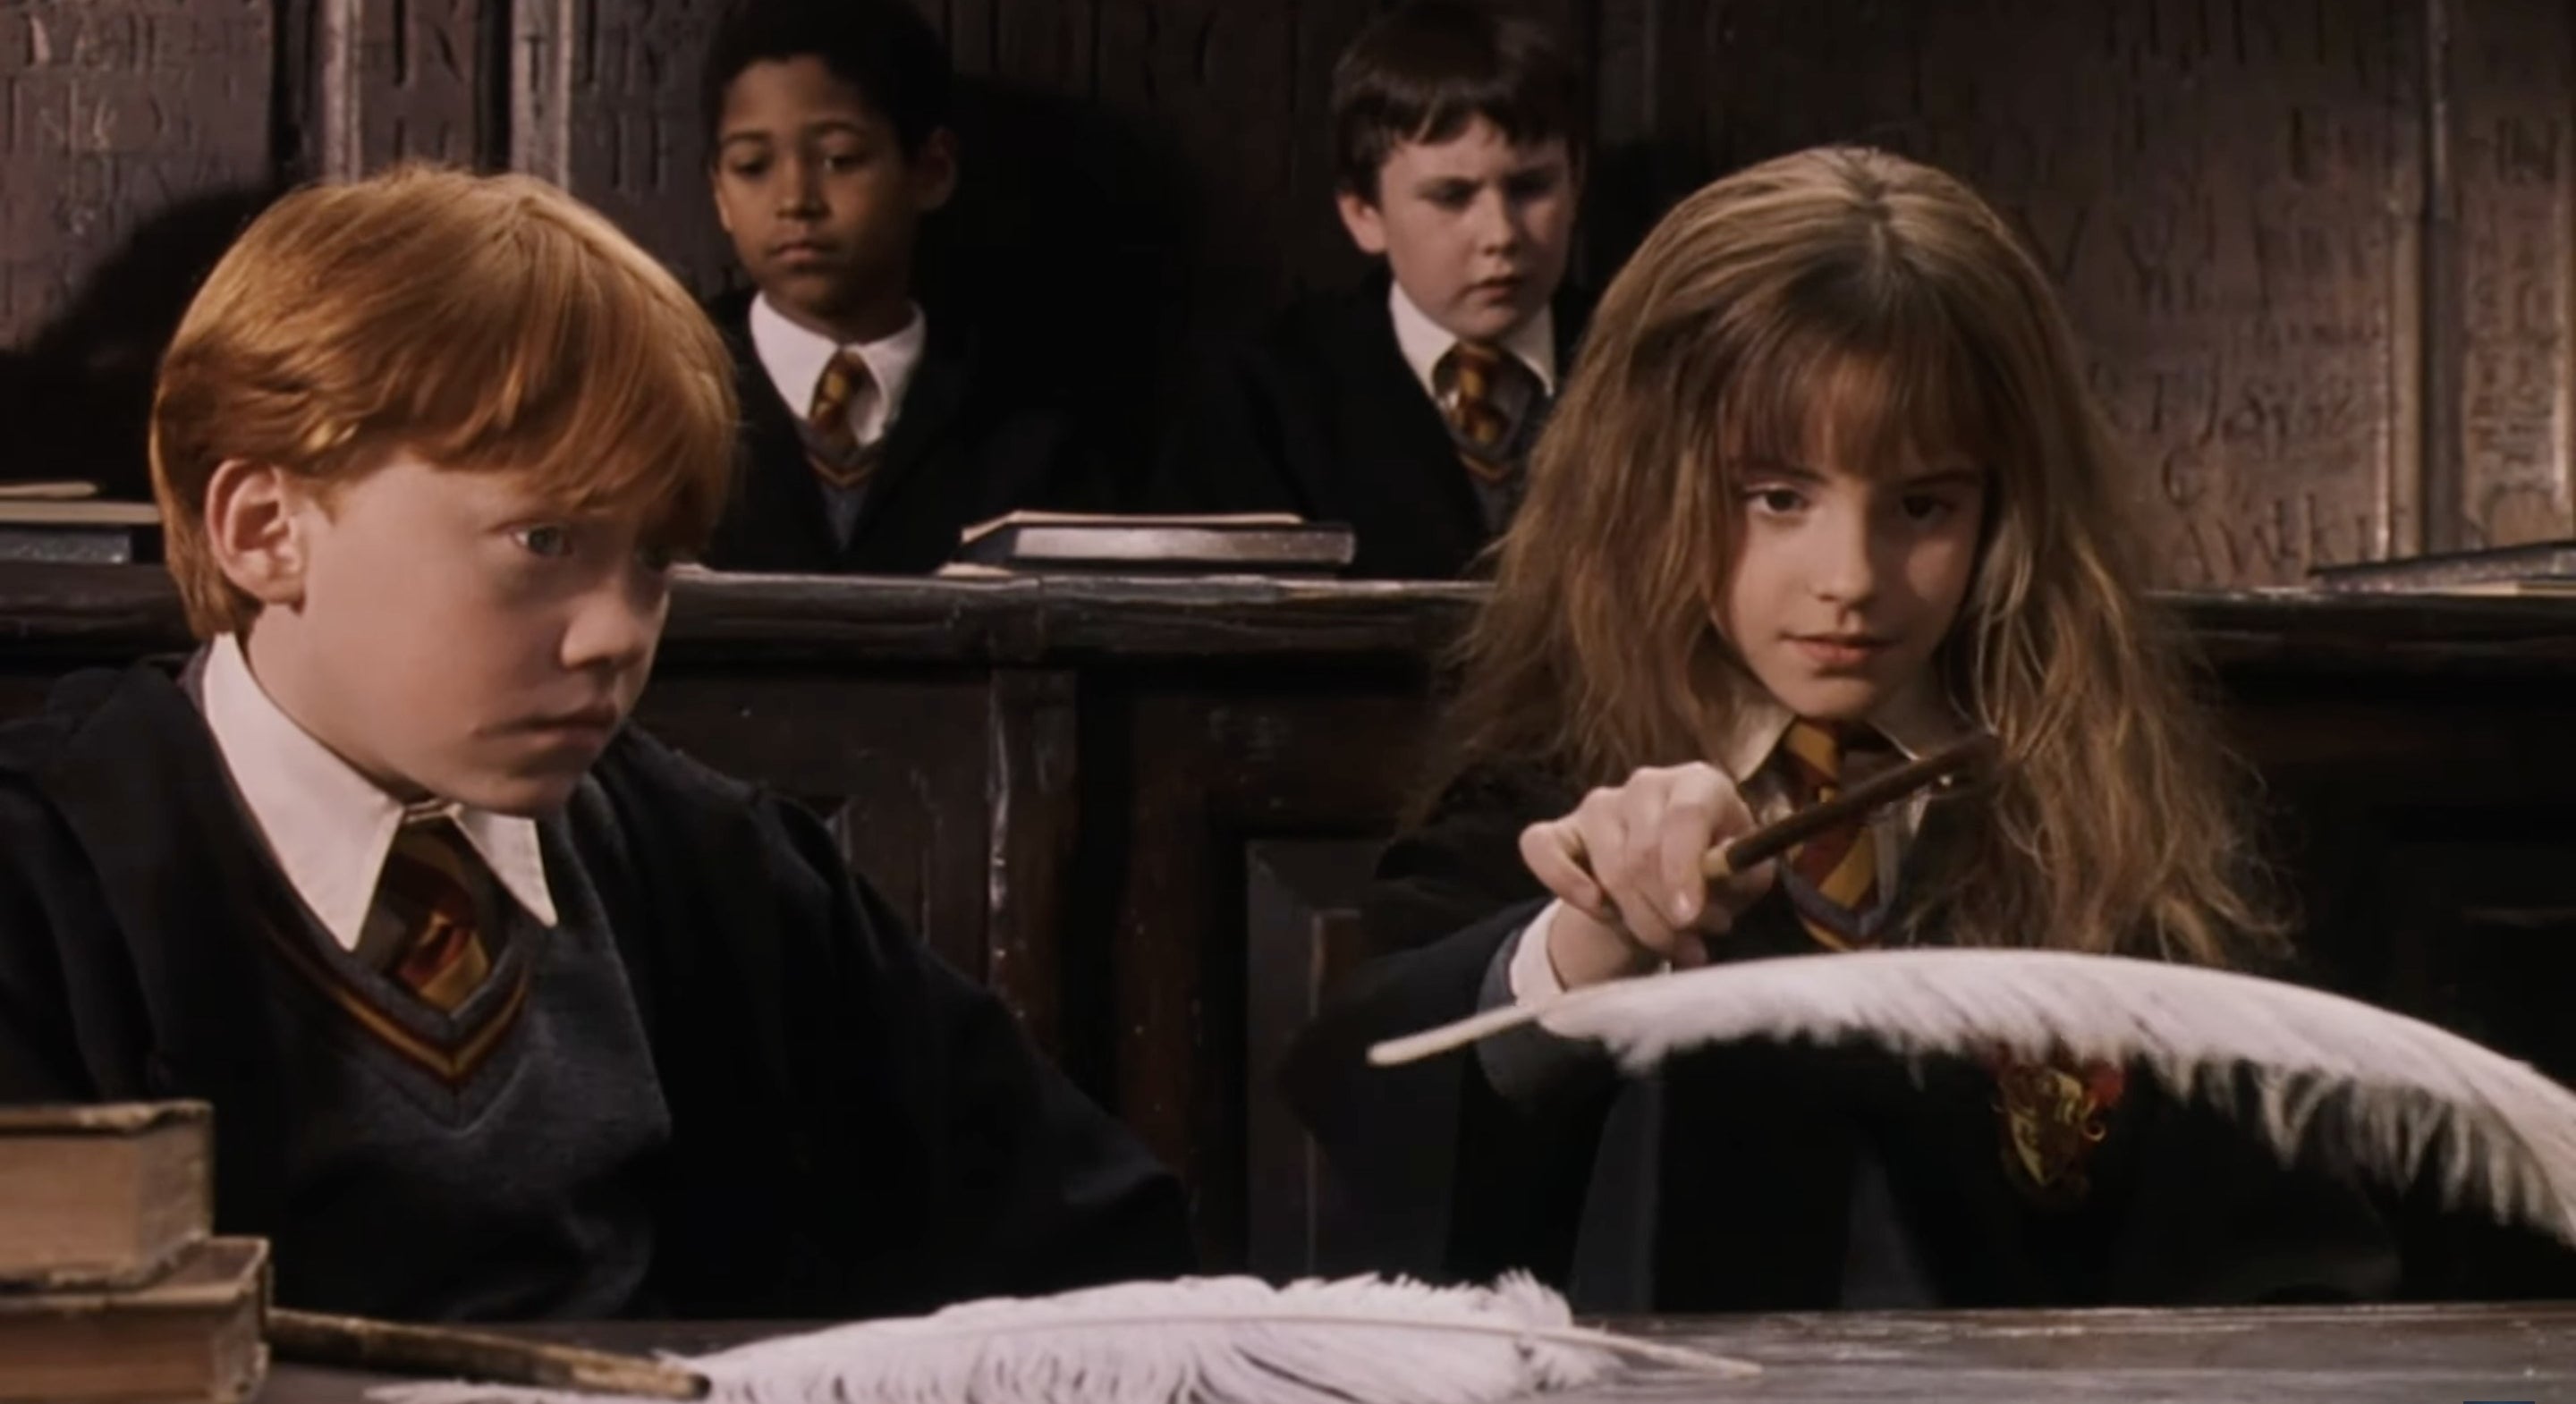 Ron Weasley and Hermione Granger